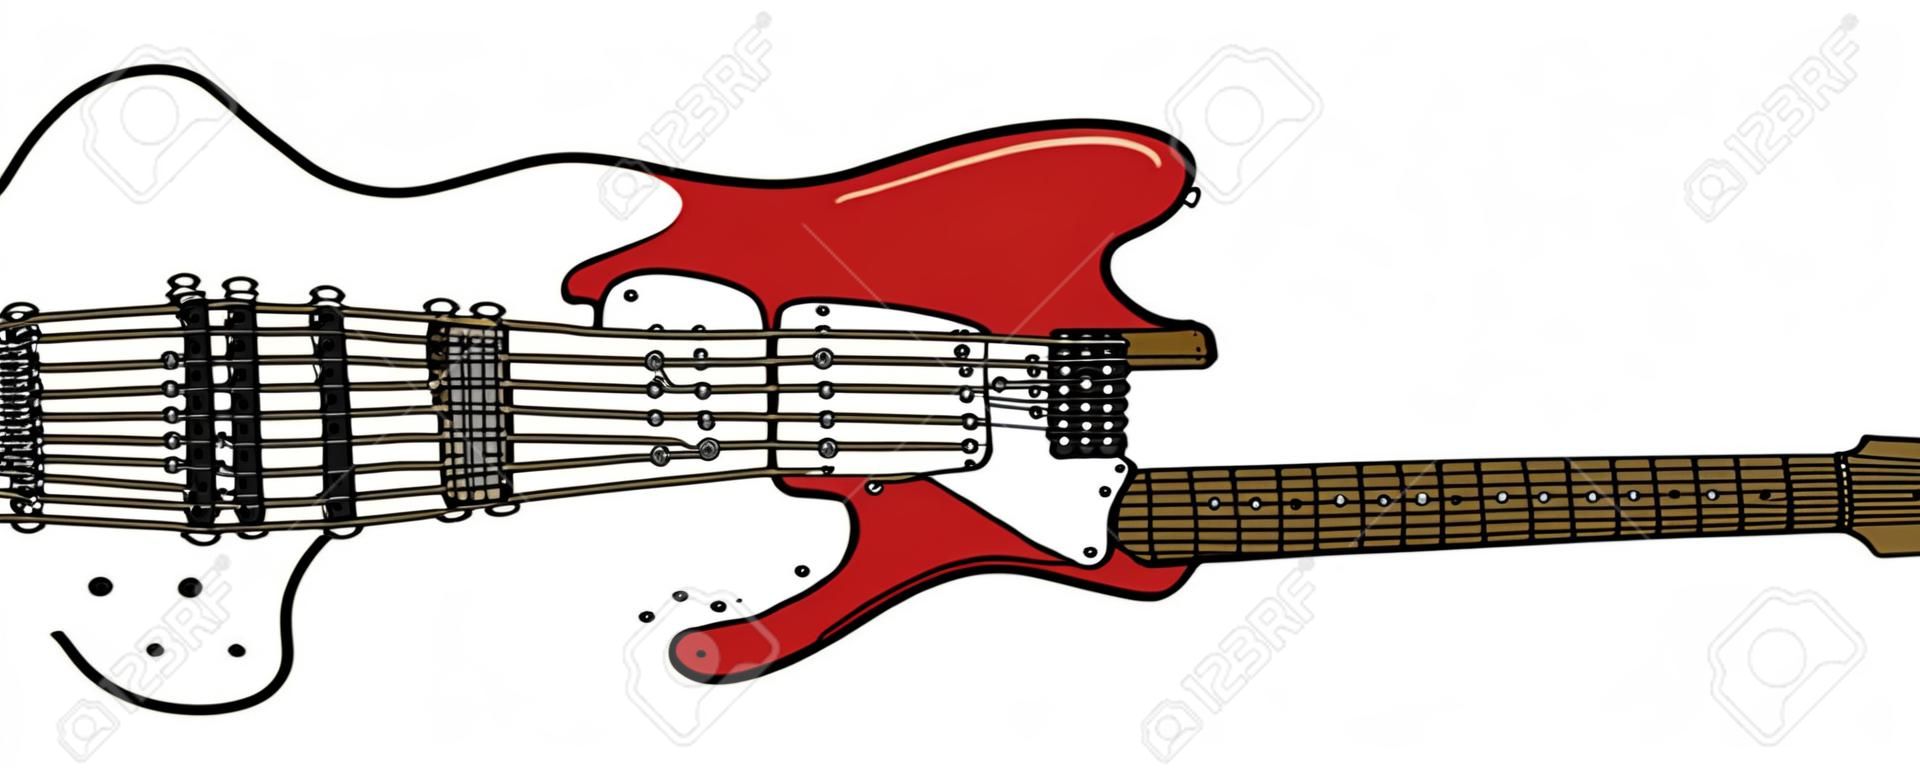 The vectorized hand drawing of a classic red electric guitar